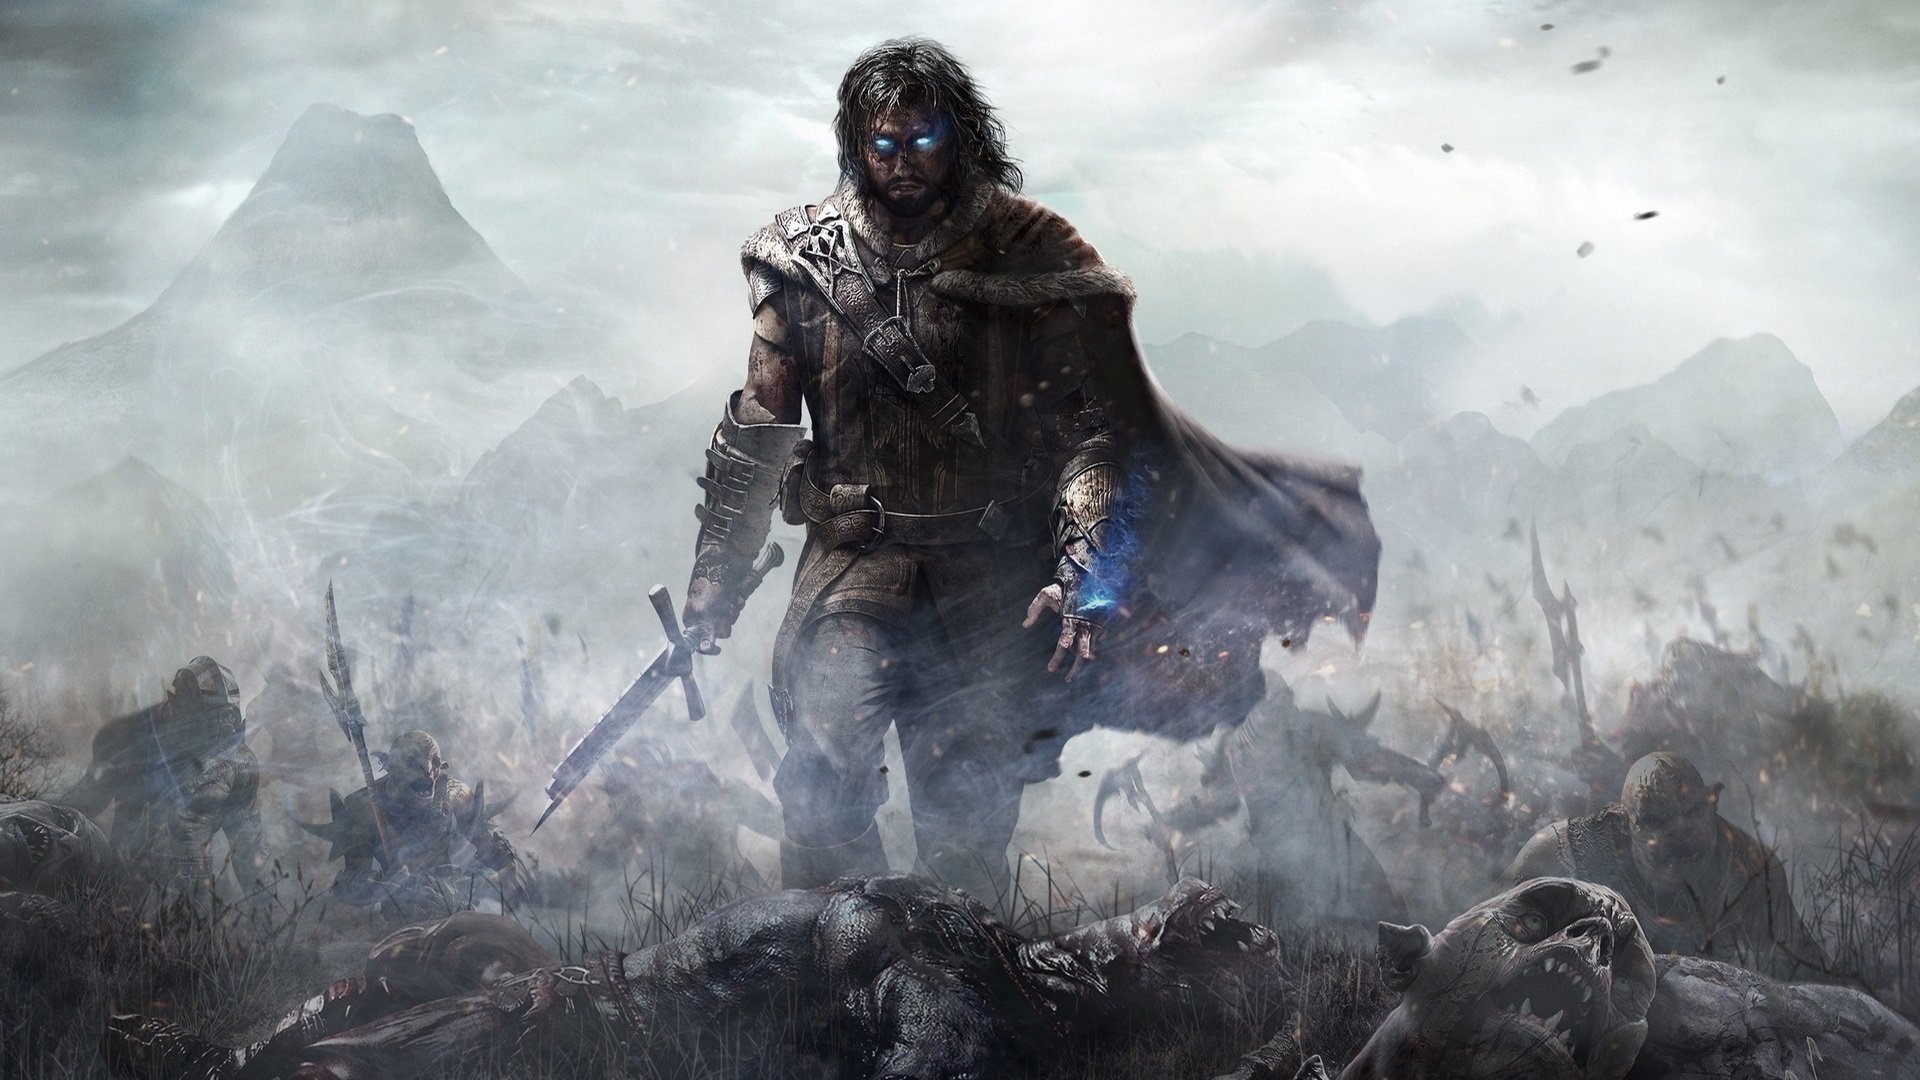 orcs, Men, Middle earth: Shadow of Mordor, Video games, The Lord of the Rings, Artwork, Fantasy art, Orc, Sword, Cape Wallpaper